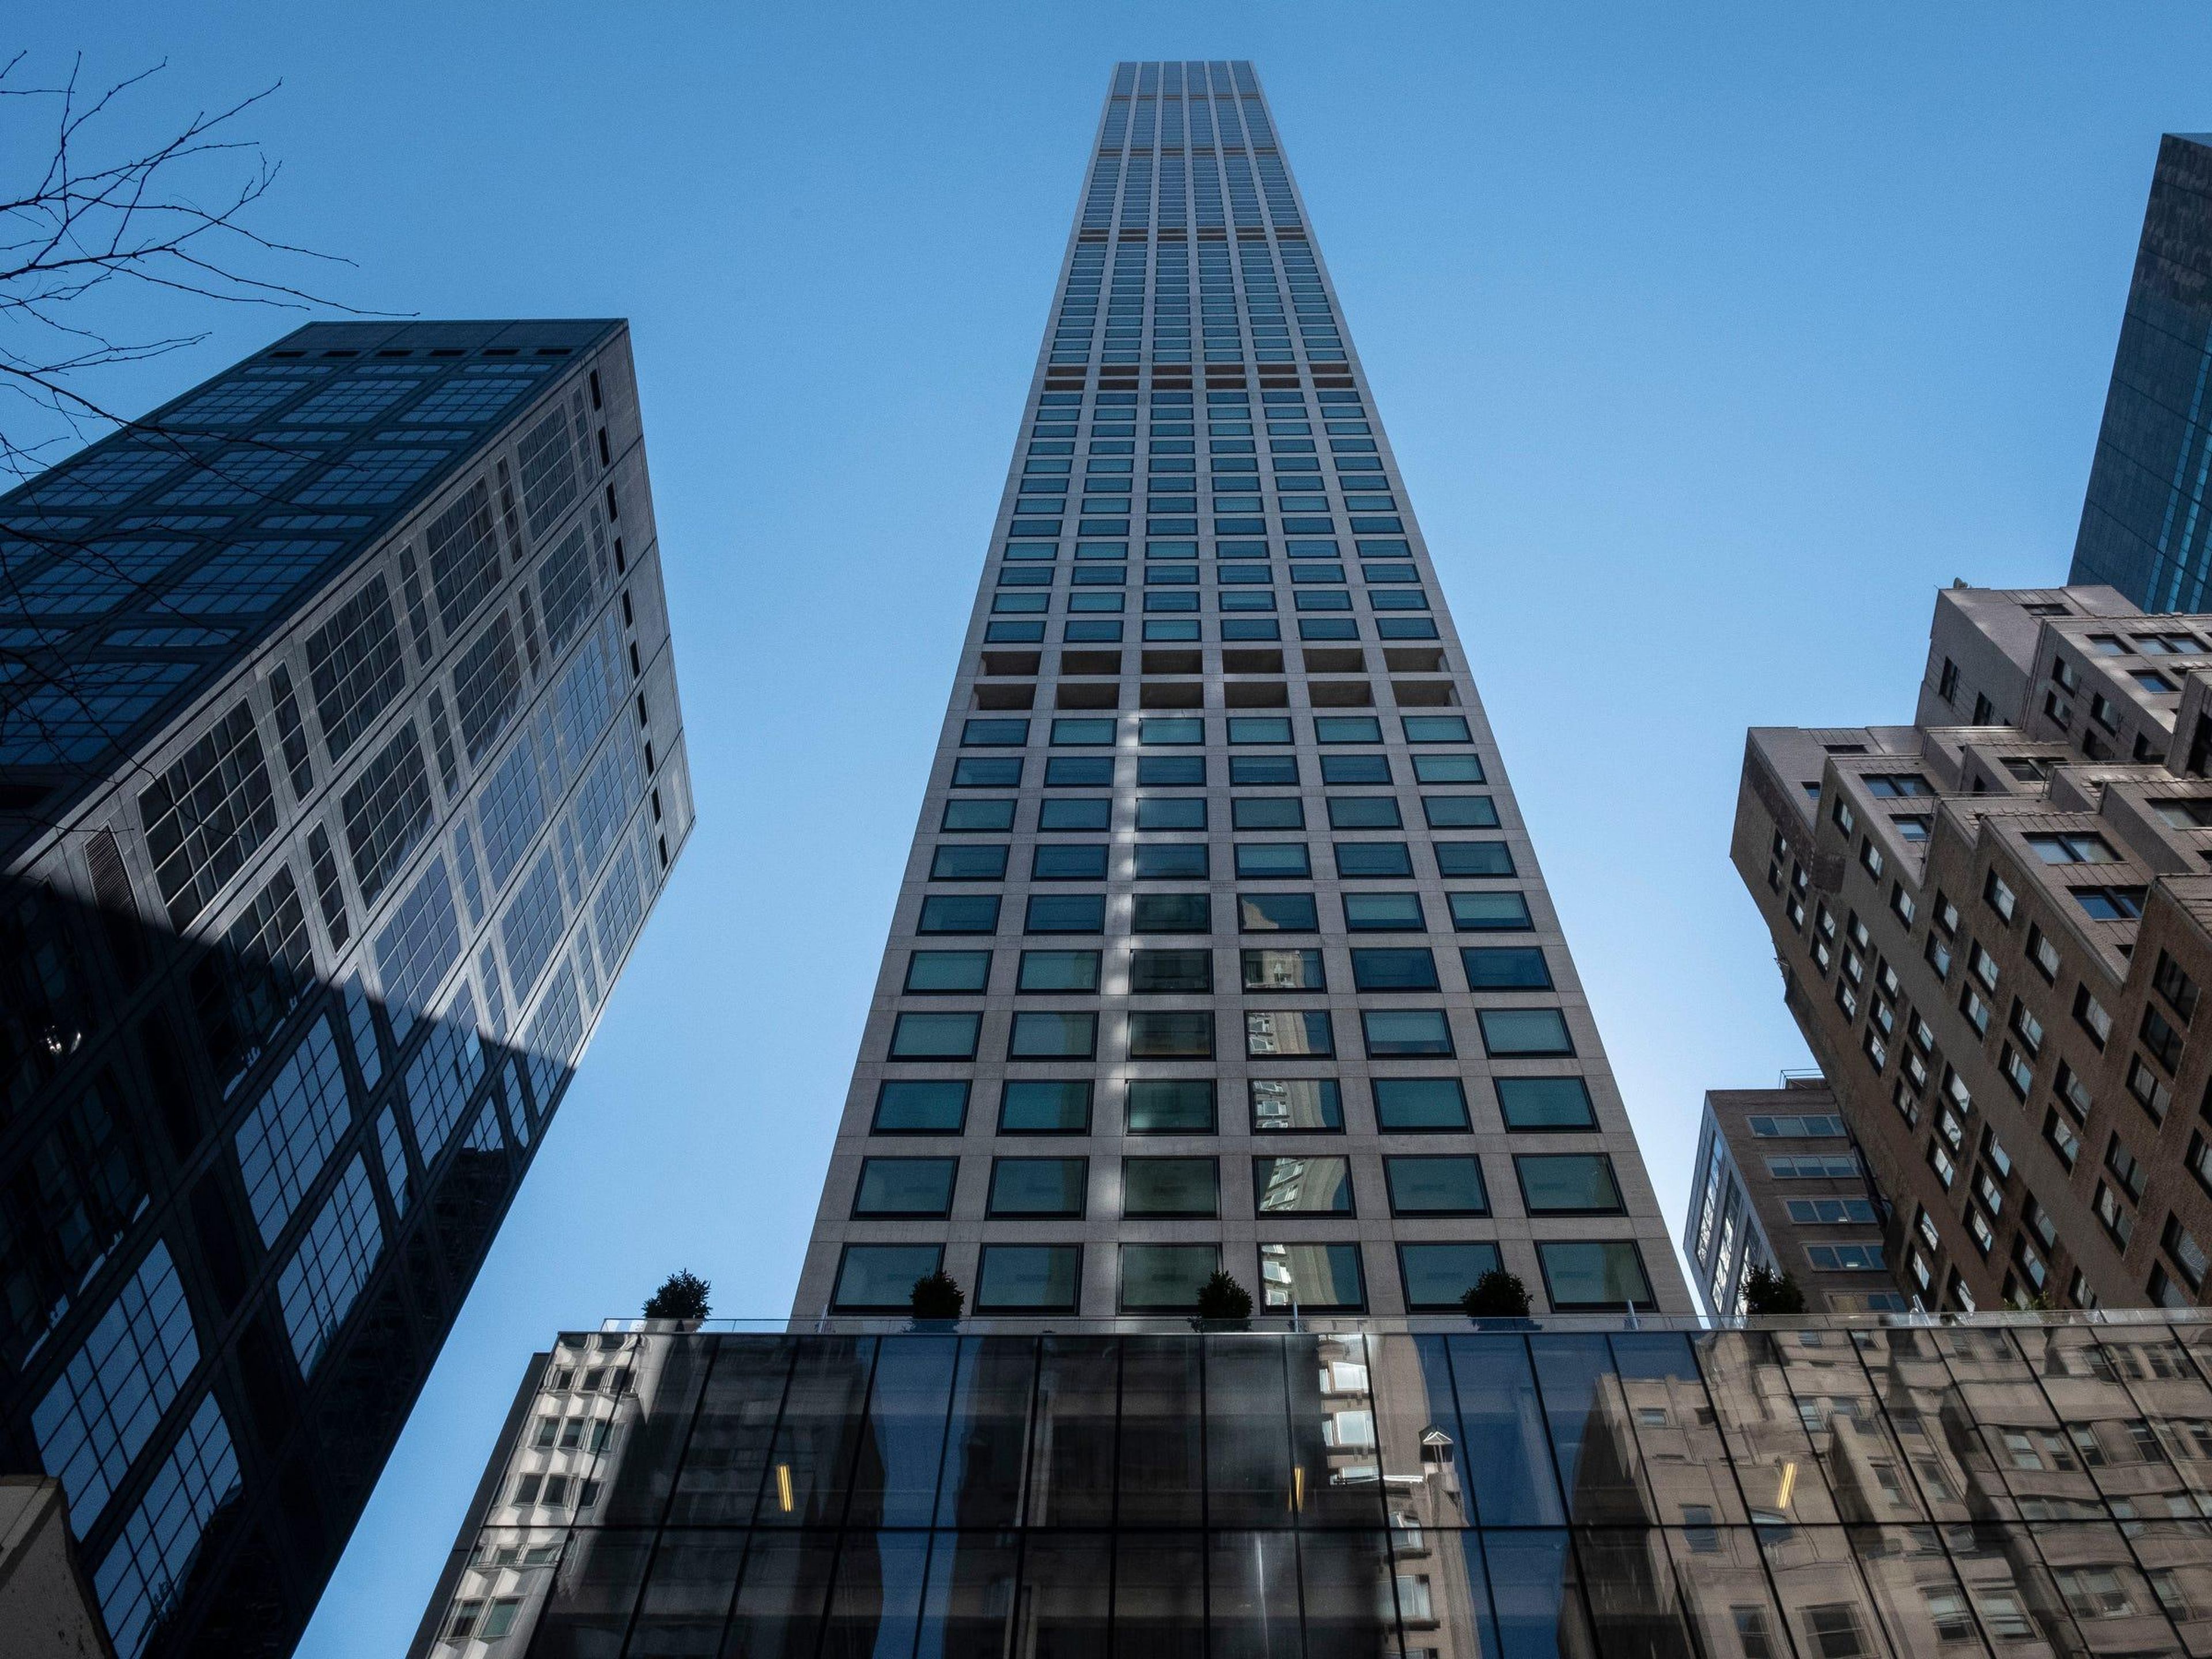 1. Luxury high-rises may fall out of favor